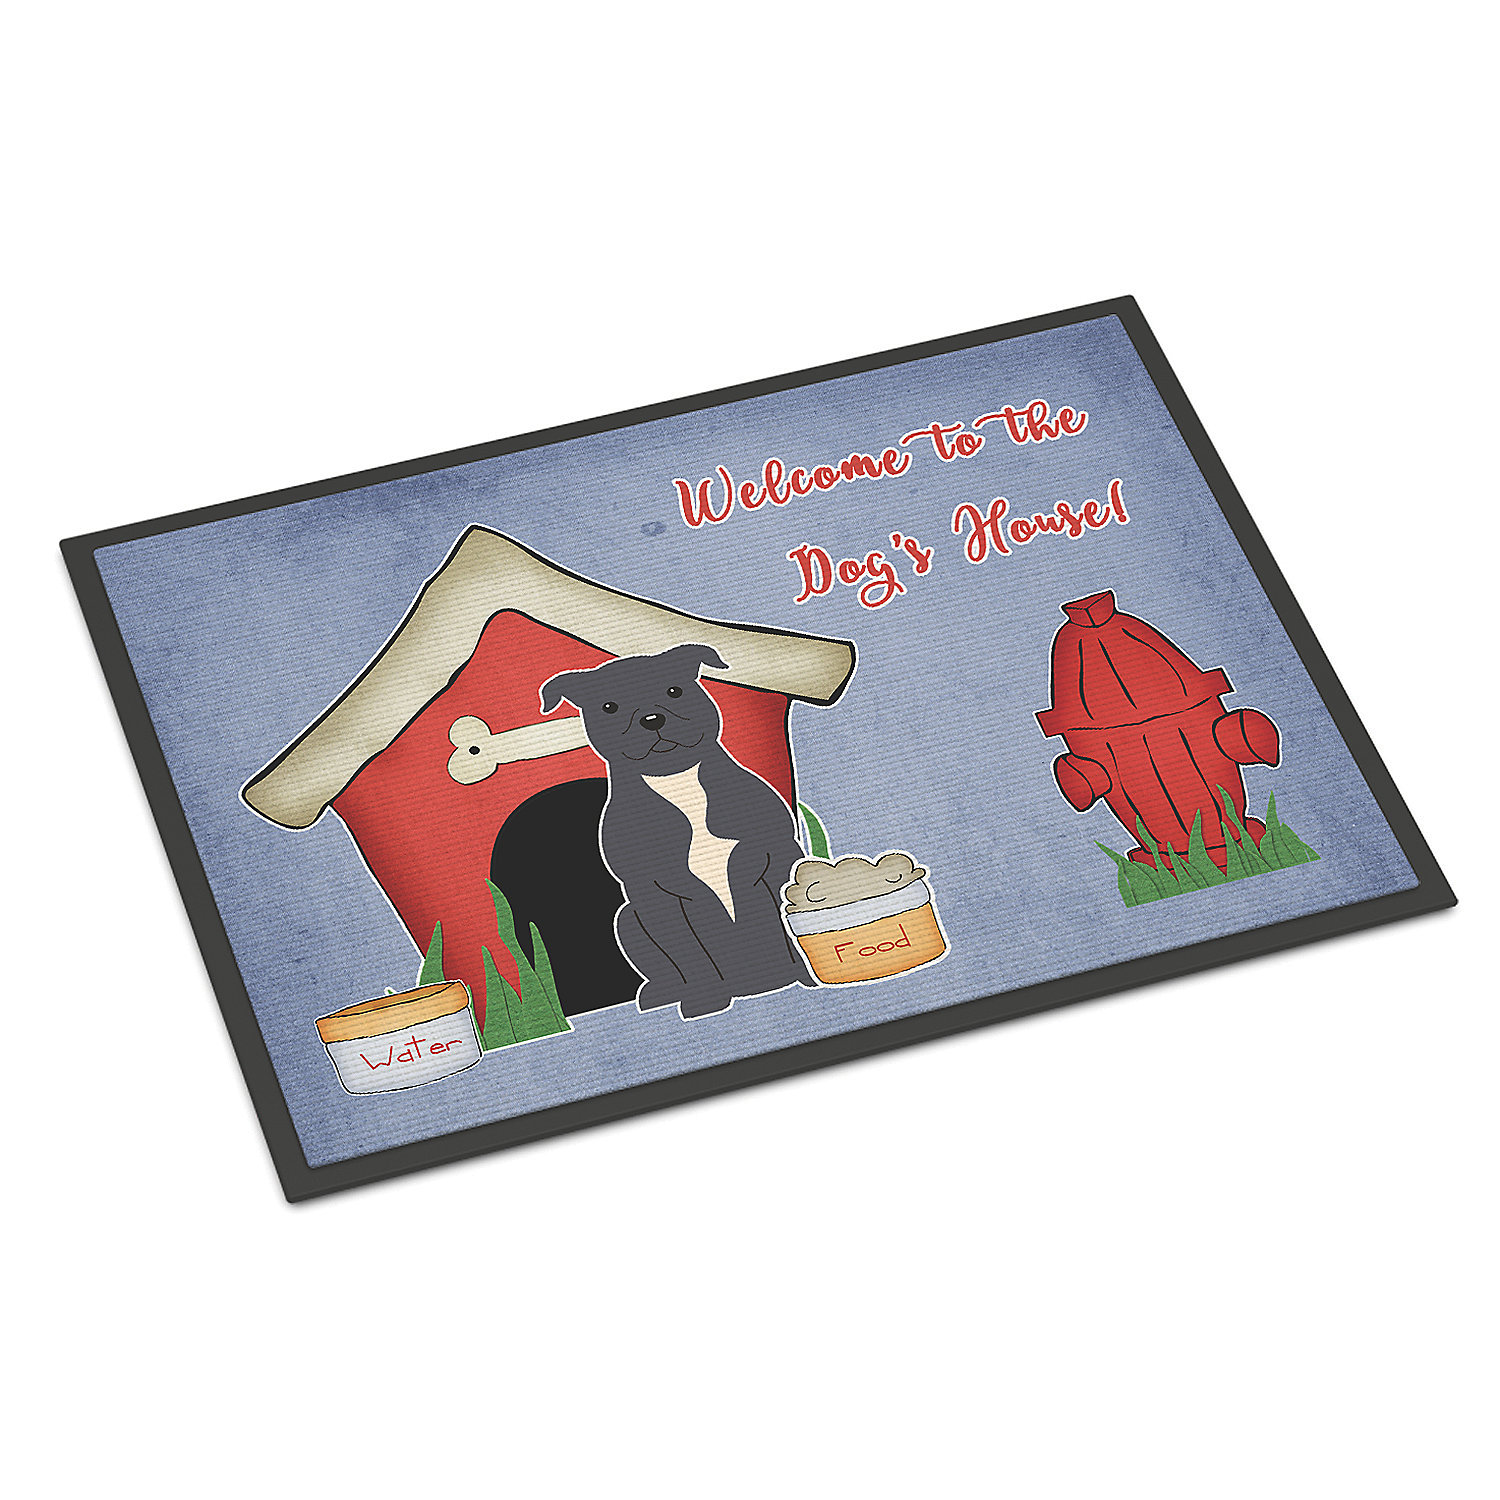 Carolines Treasures Dog House Collection Staffordshire Bull Terrier Blue Indoor or Outdoor Mat 24x36 BB2800JMAT 24 x 36 Multicolor